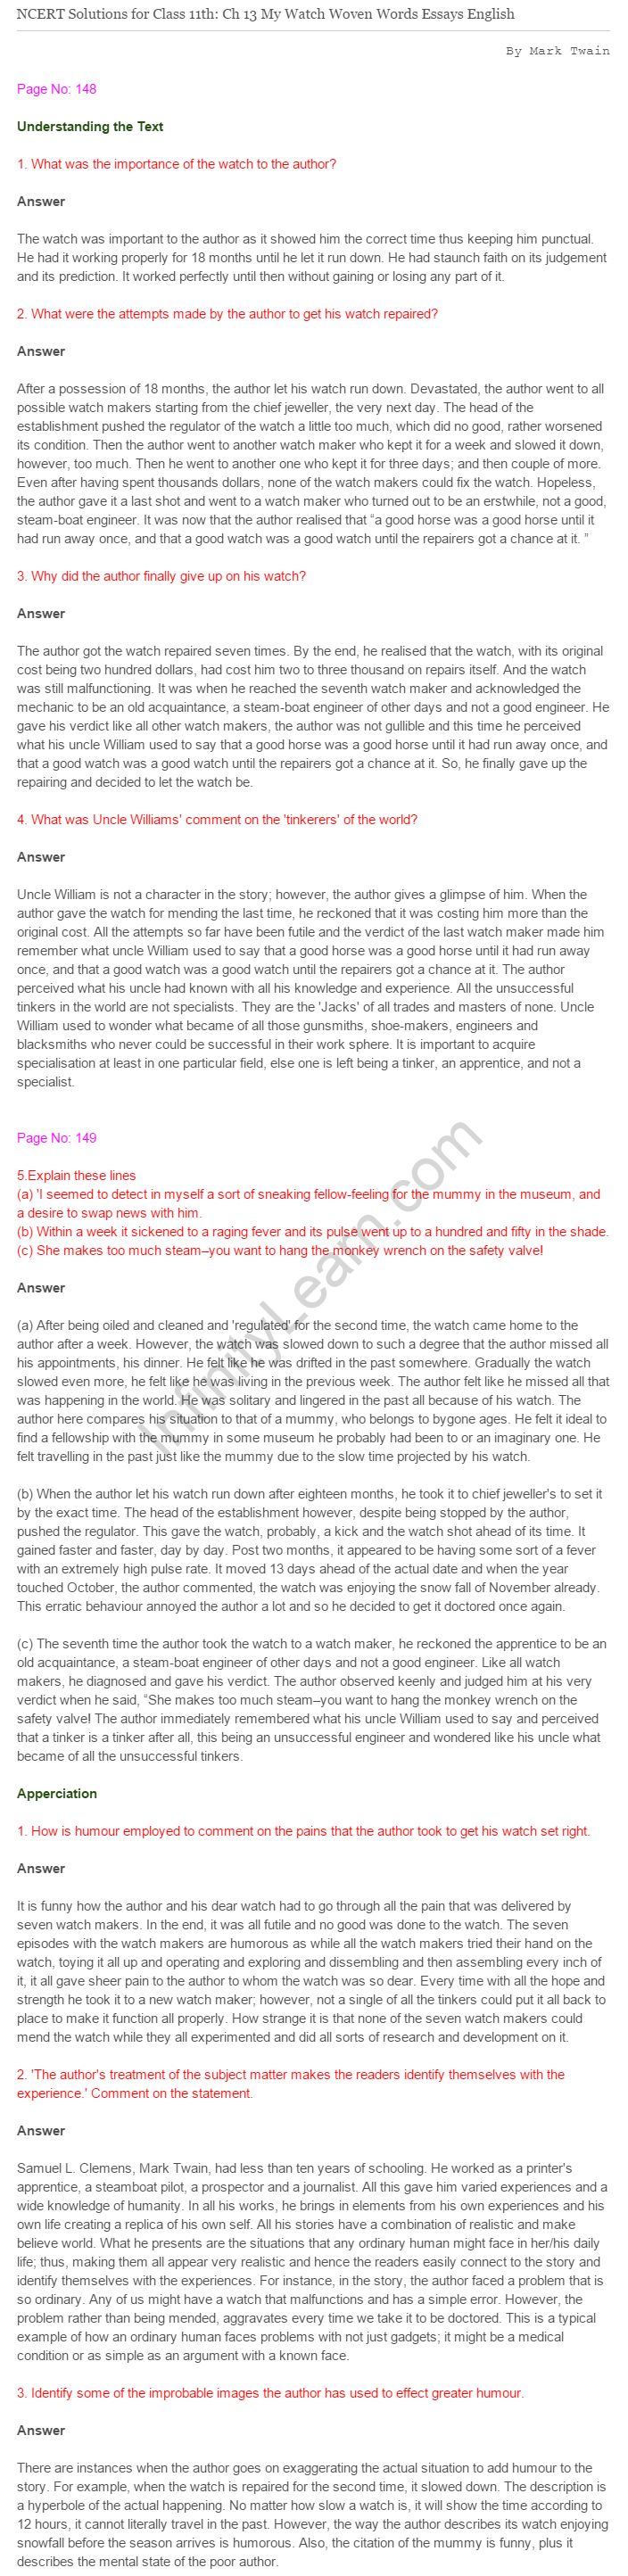 NCERT Solutions For Class 11 English Woven Words My Watch